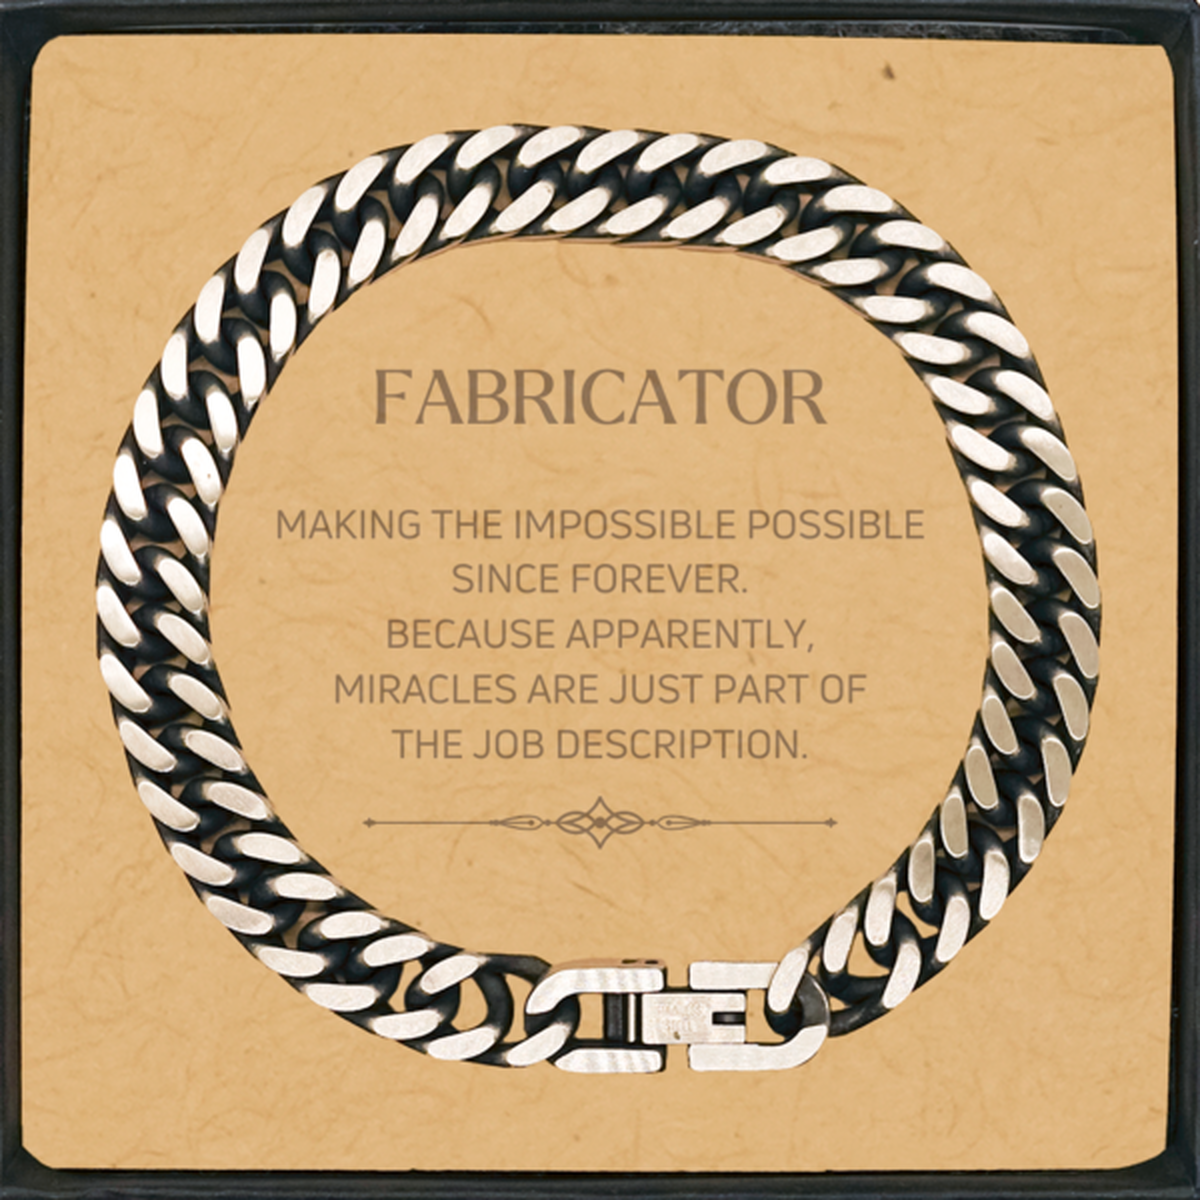 Funny Fabricator Gifts, Miracles are just part of the job description, Inspirational Birthday Cuban Link Chain Bracelet For Fabricator, Men, Women, Coworkers, Friends, Boss